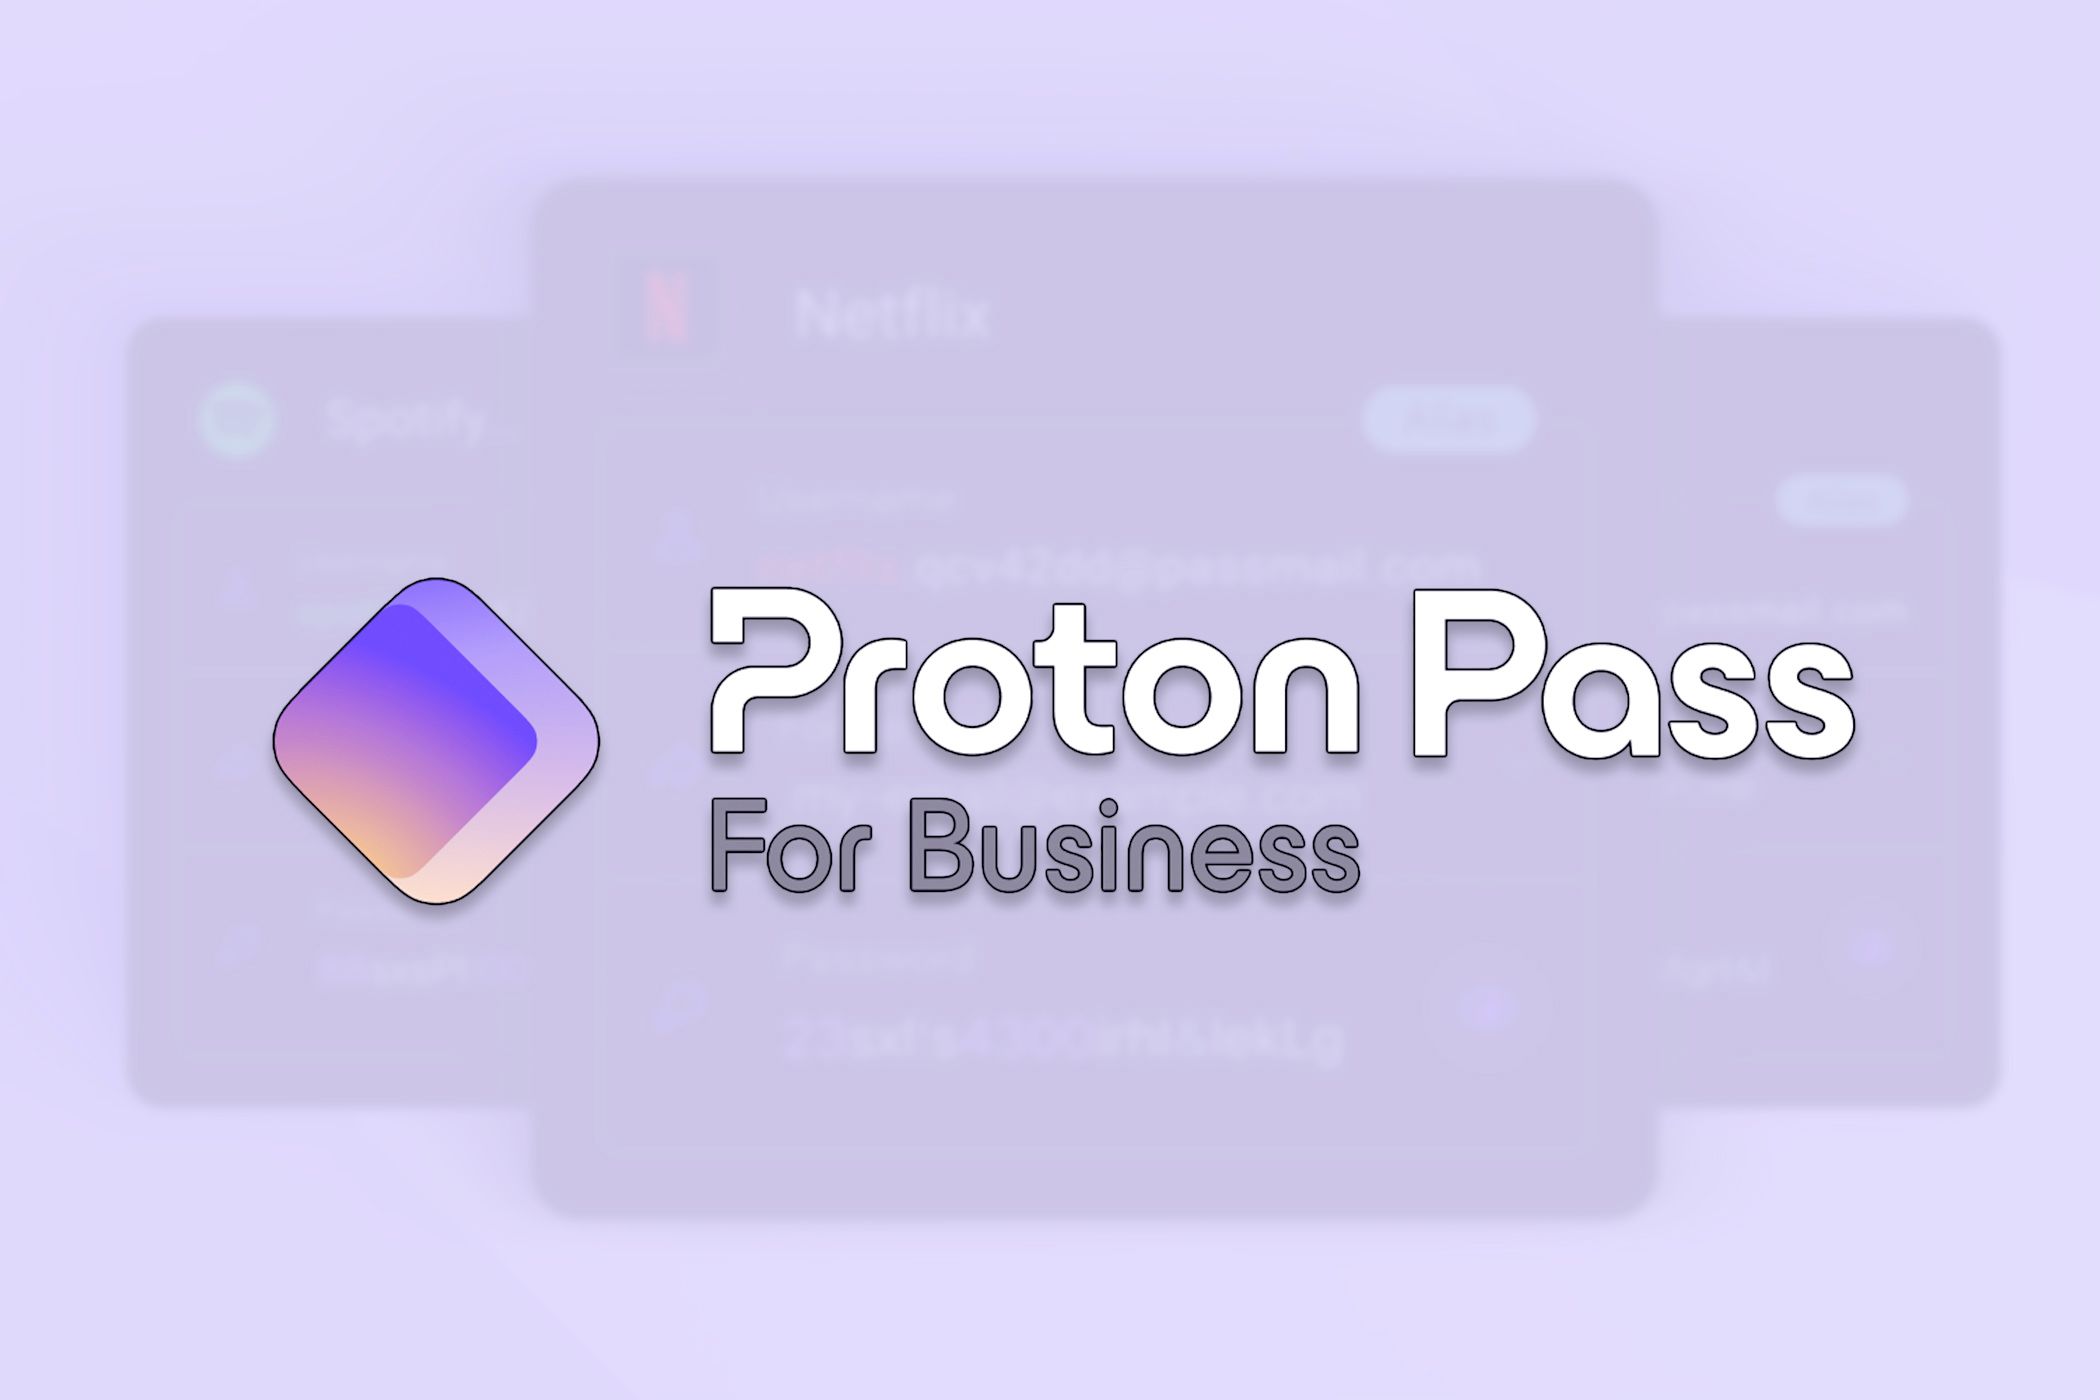 The Proton Pass for Business logo over a purple background.